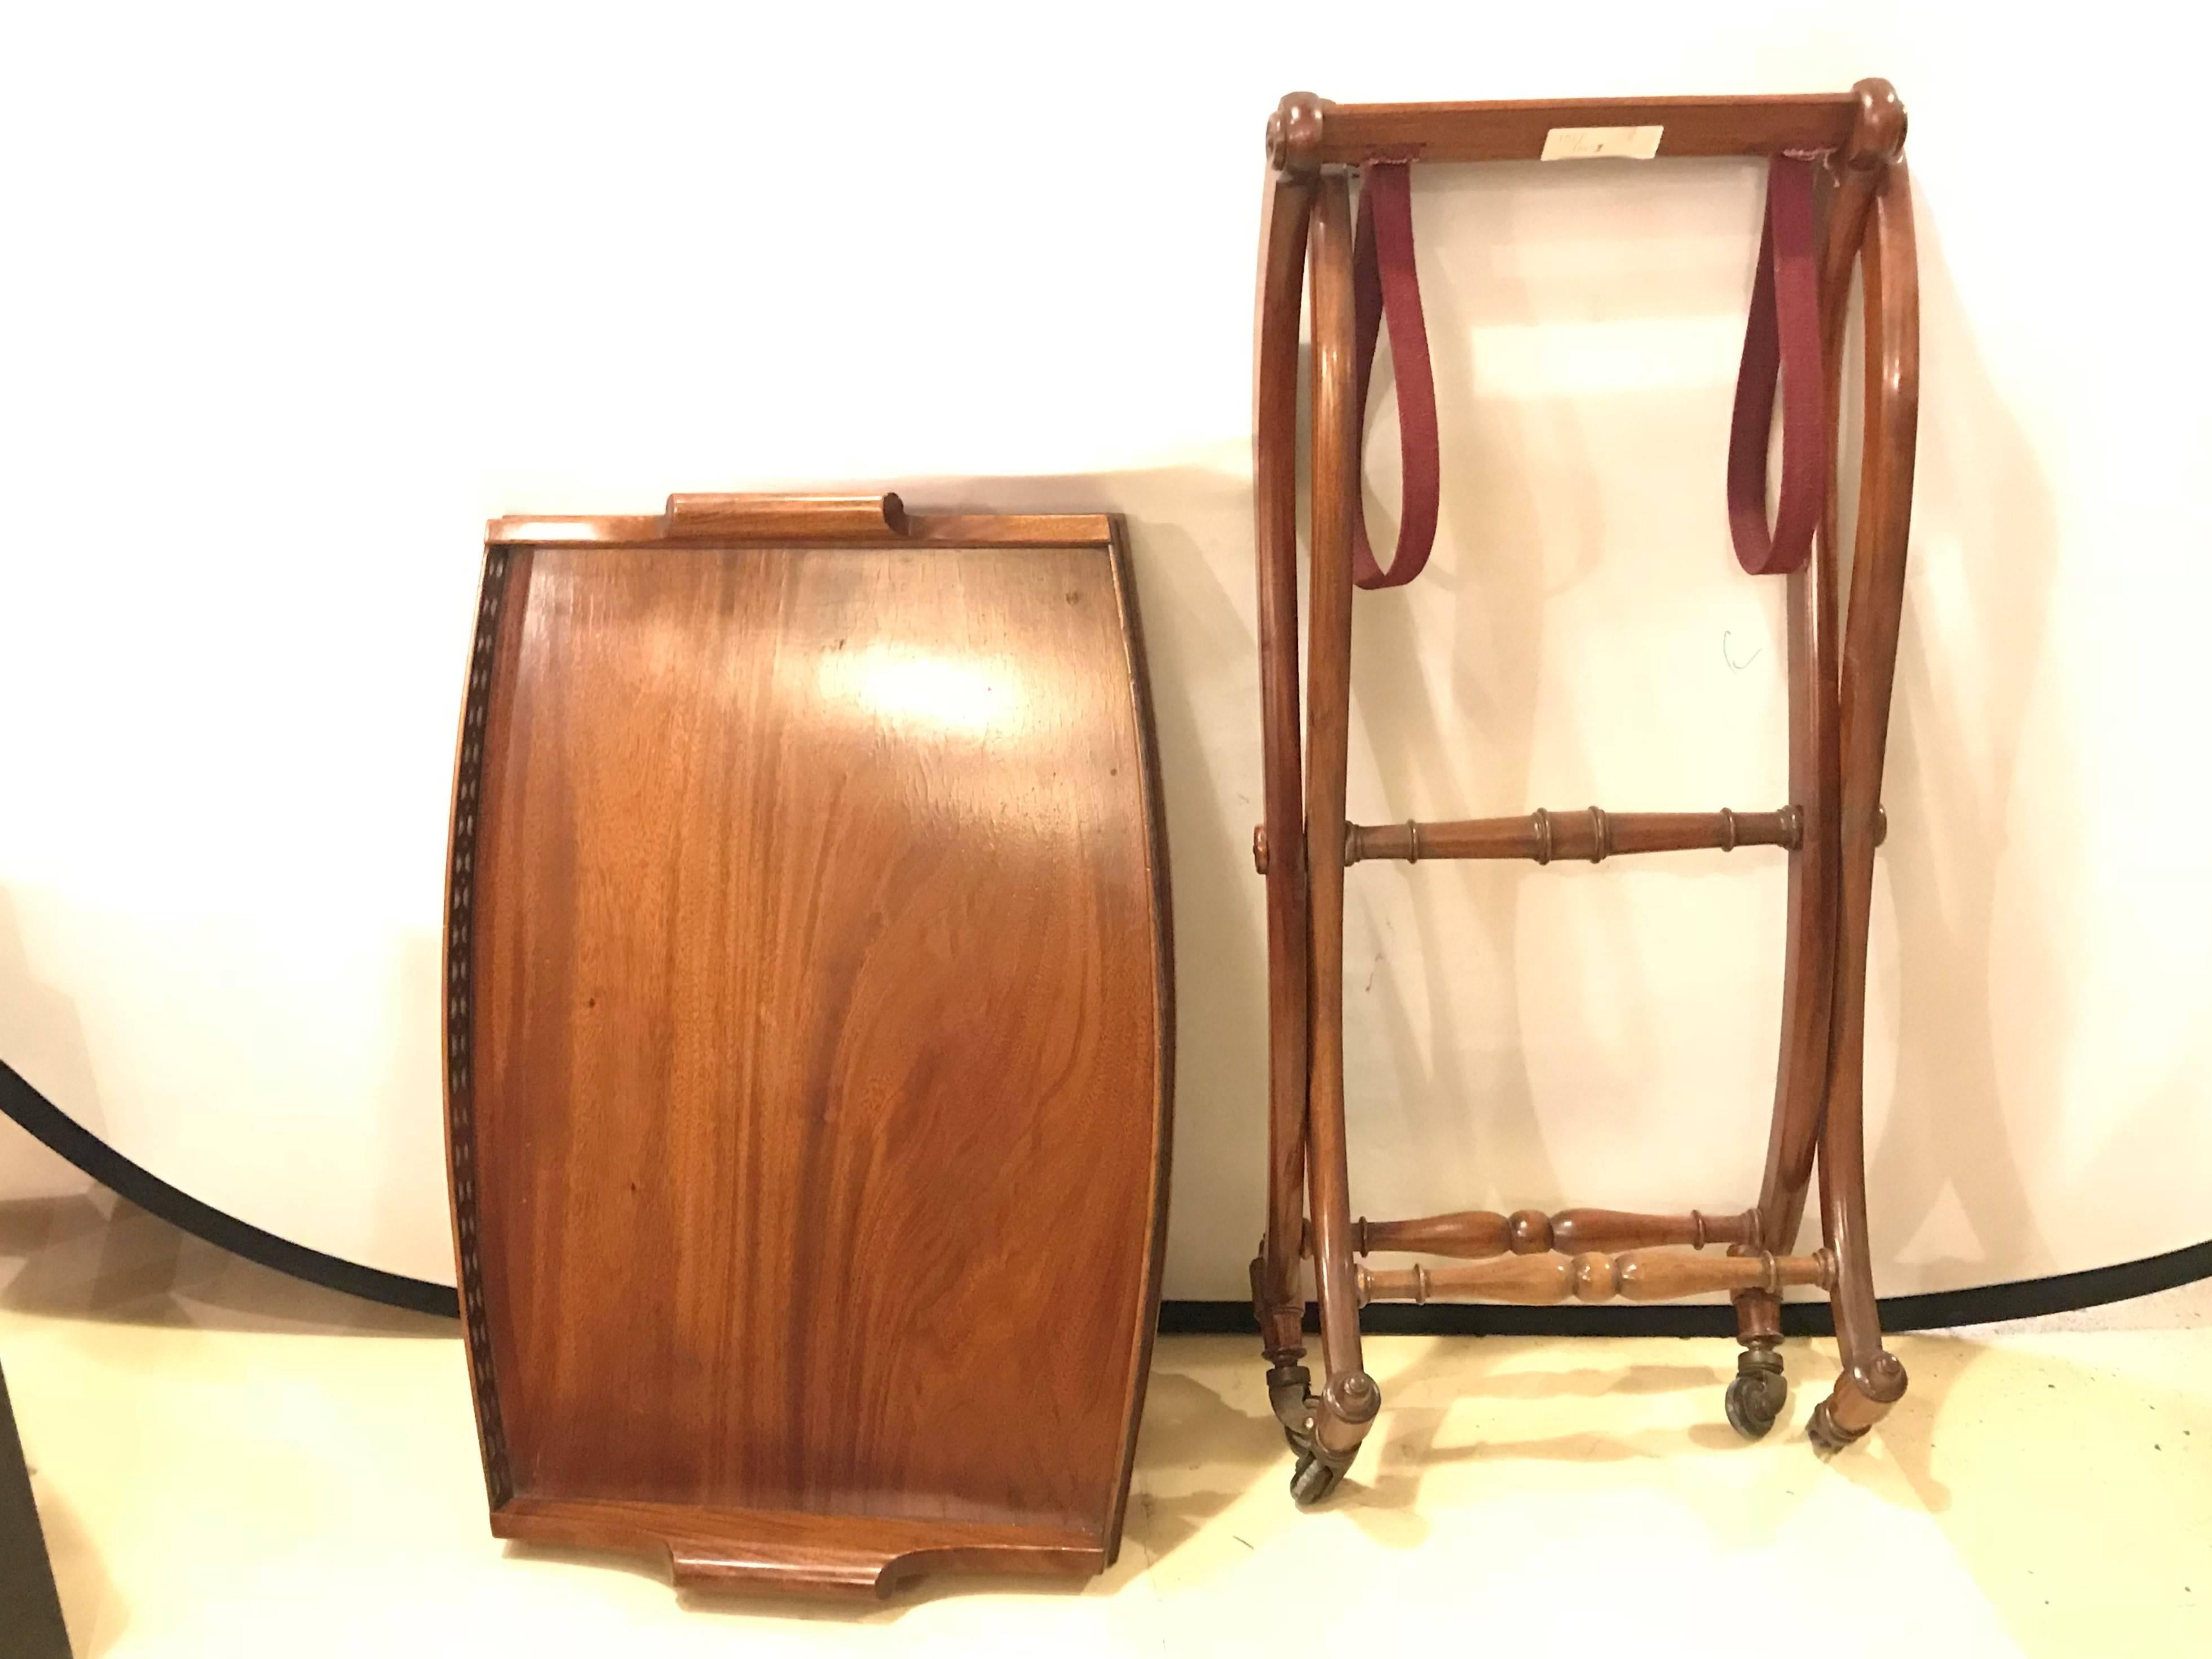 A mahogany Georgian style serving cart on casters with folding base.